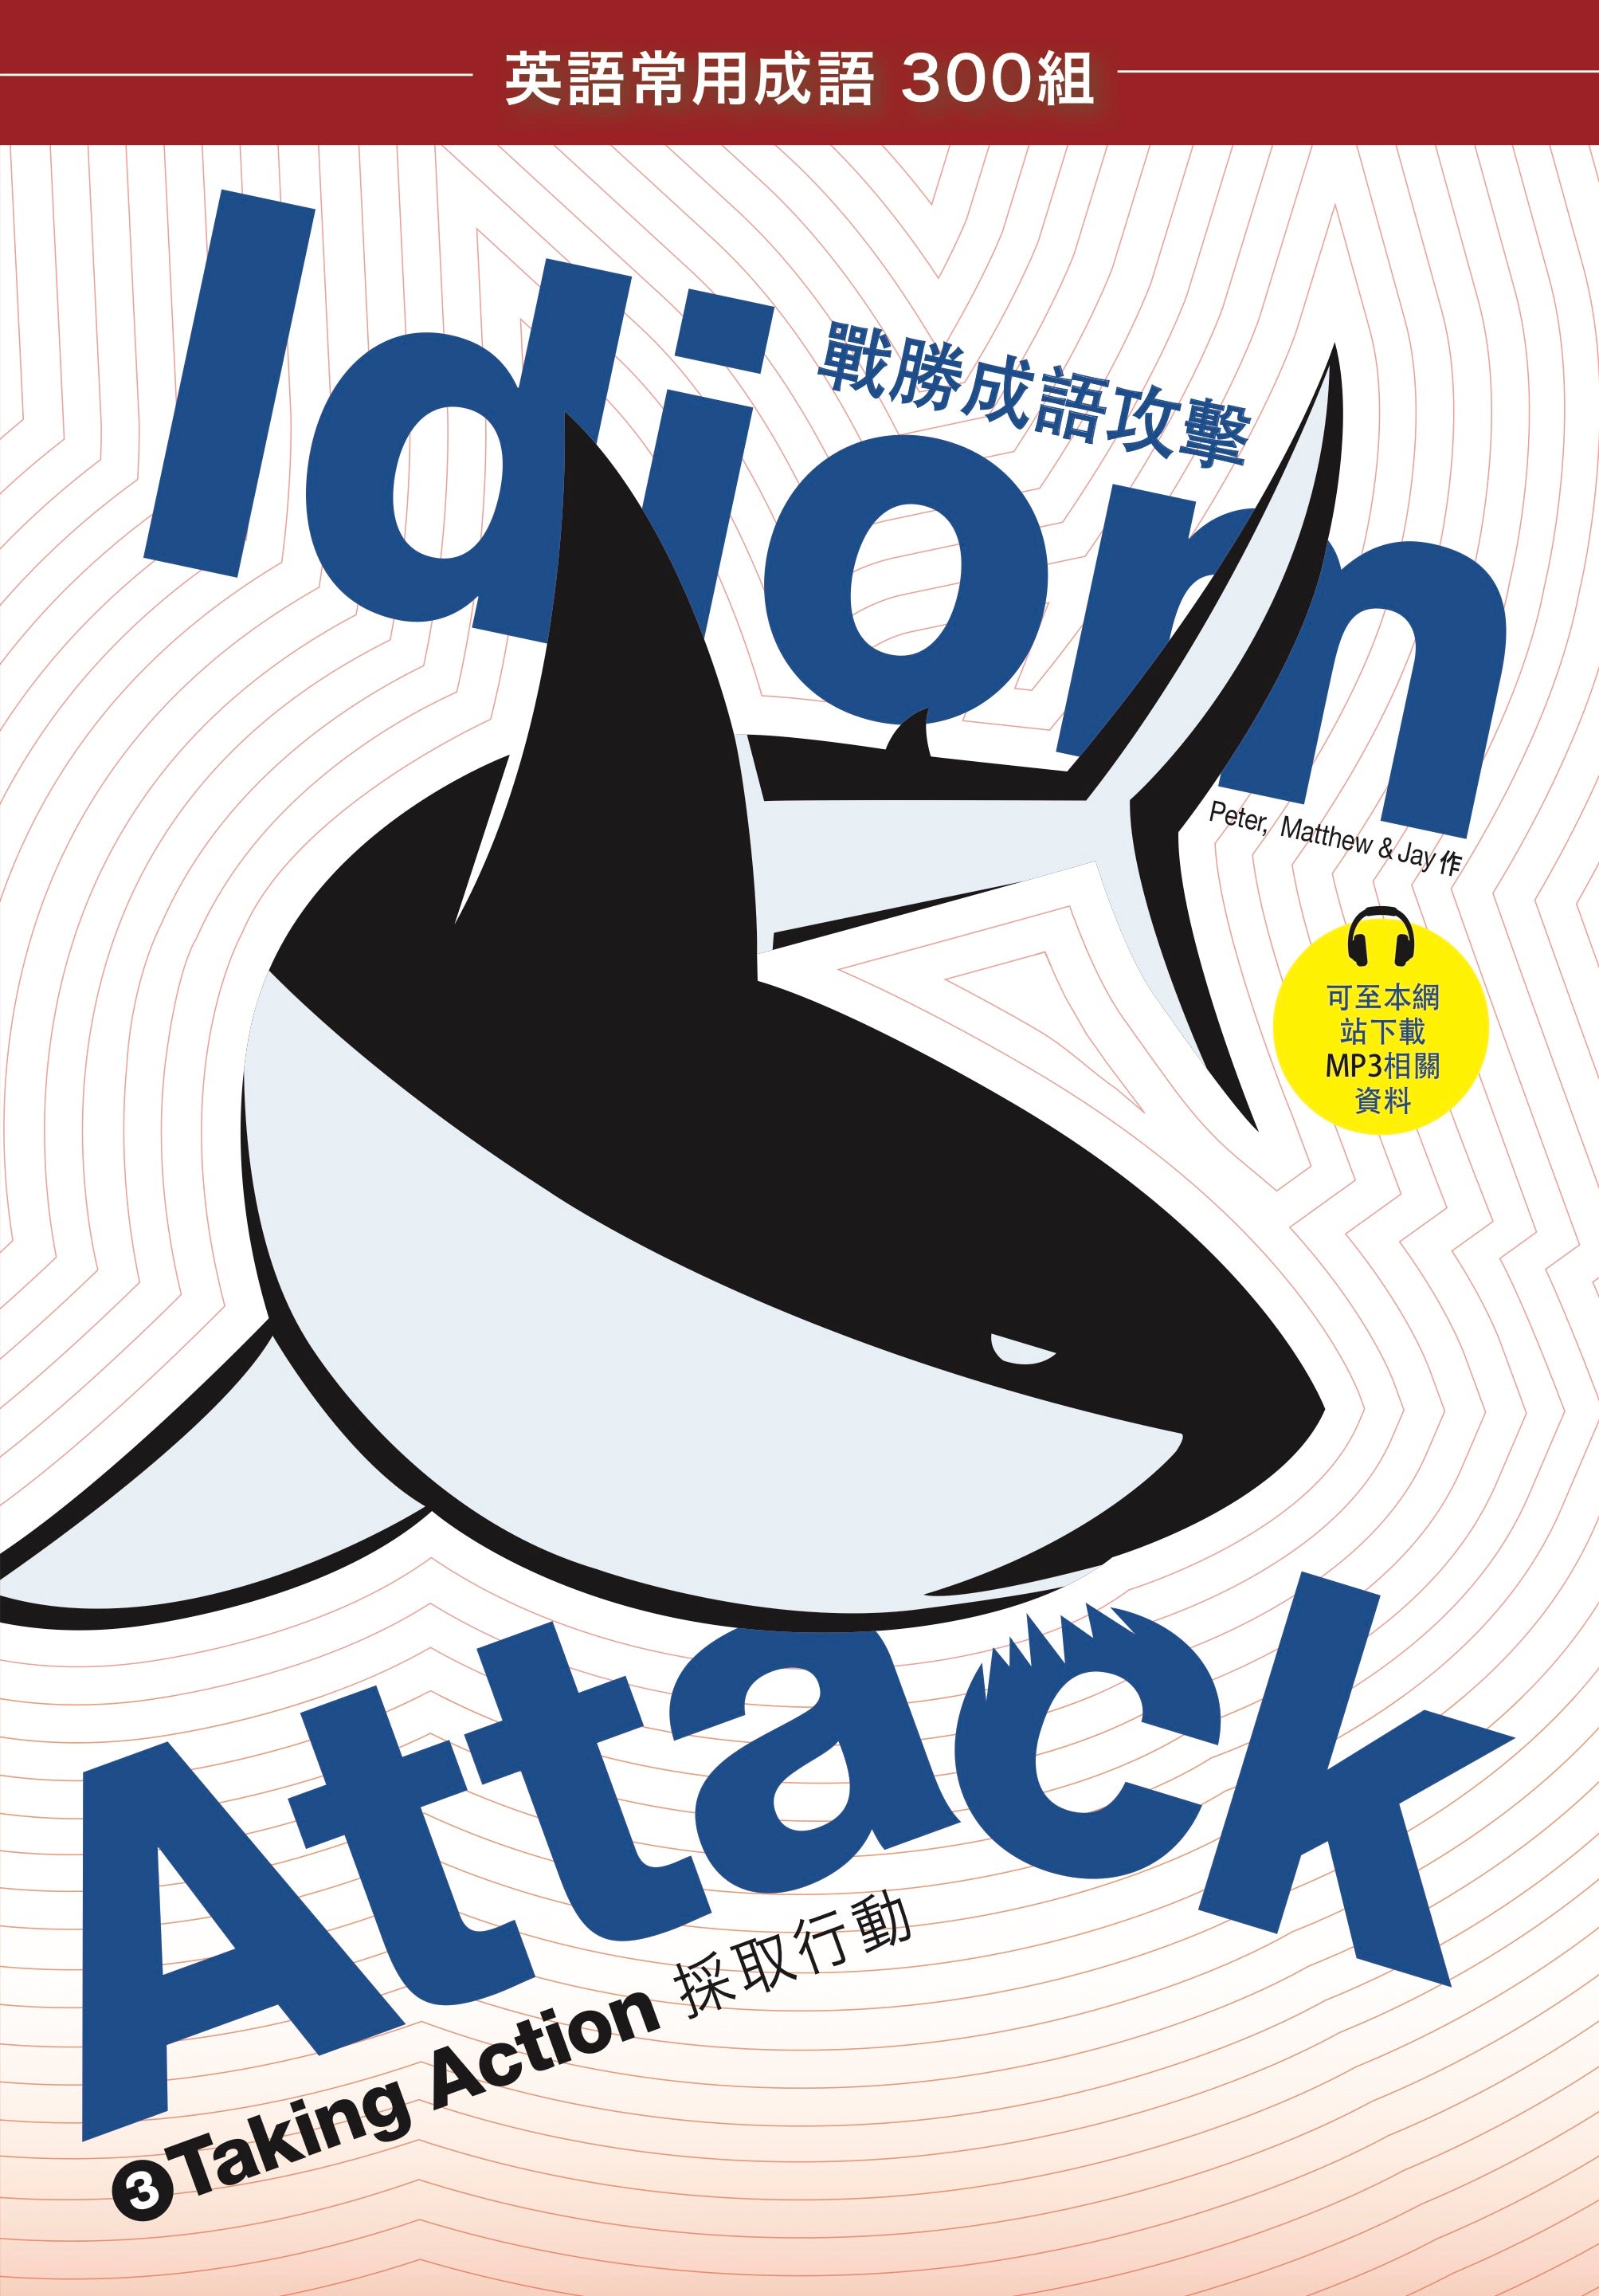 Idiom Attack Vol. 3 - Taking Action (Trad. Chinese Edition): 職場必備 3 - 採取行動 : English Idioms for ESL Learners: With 300+ Idioms in 25 Themed Chapters w/ free MP3 at IdiomAttack.com